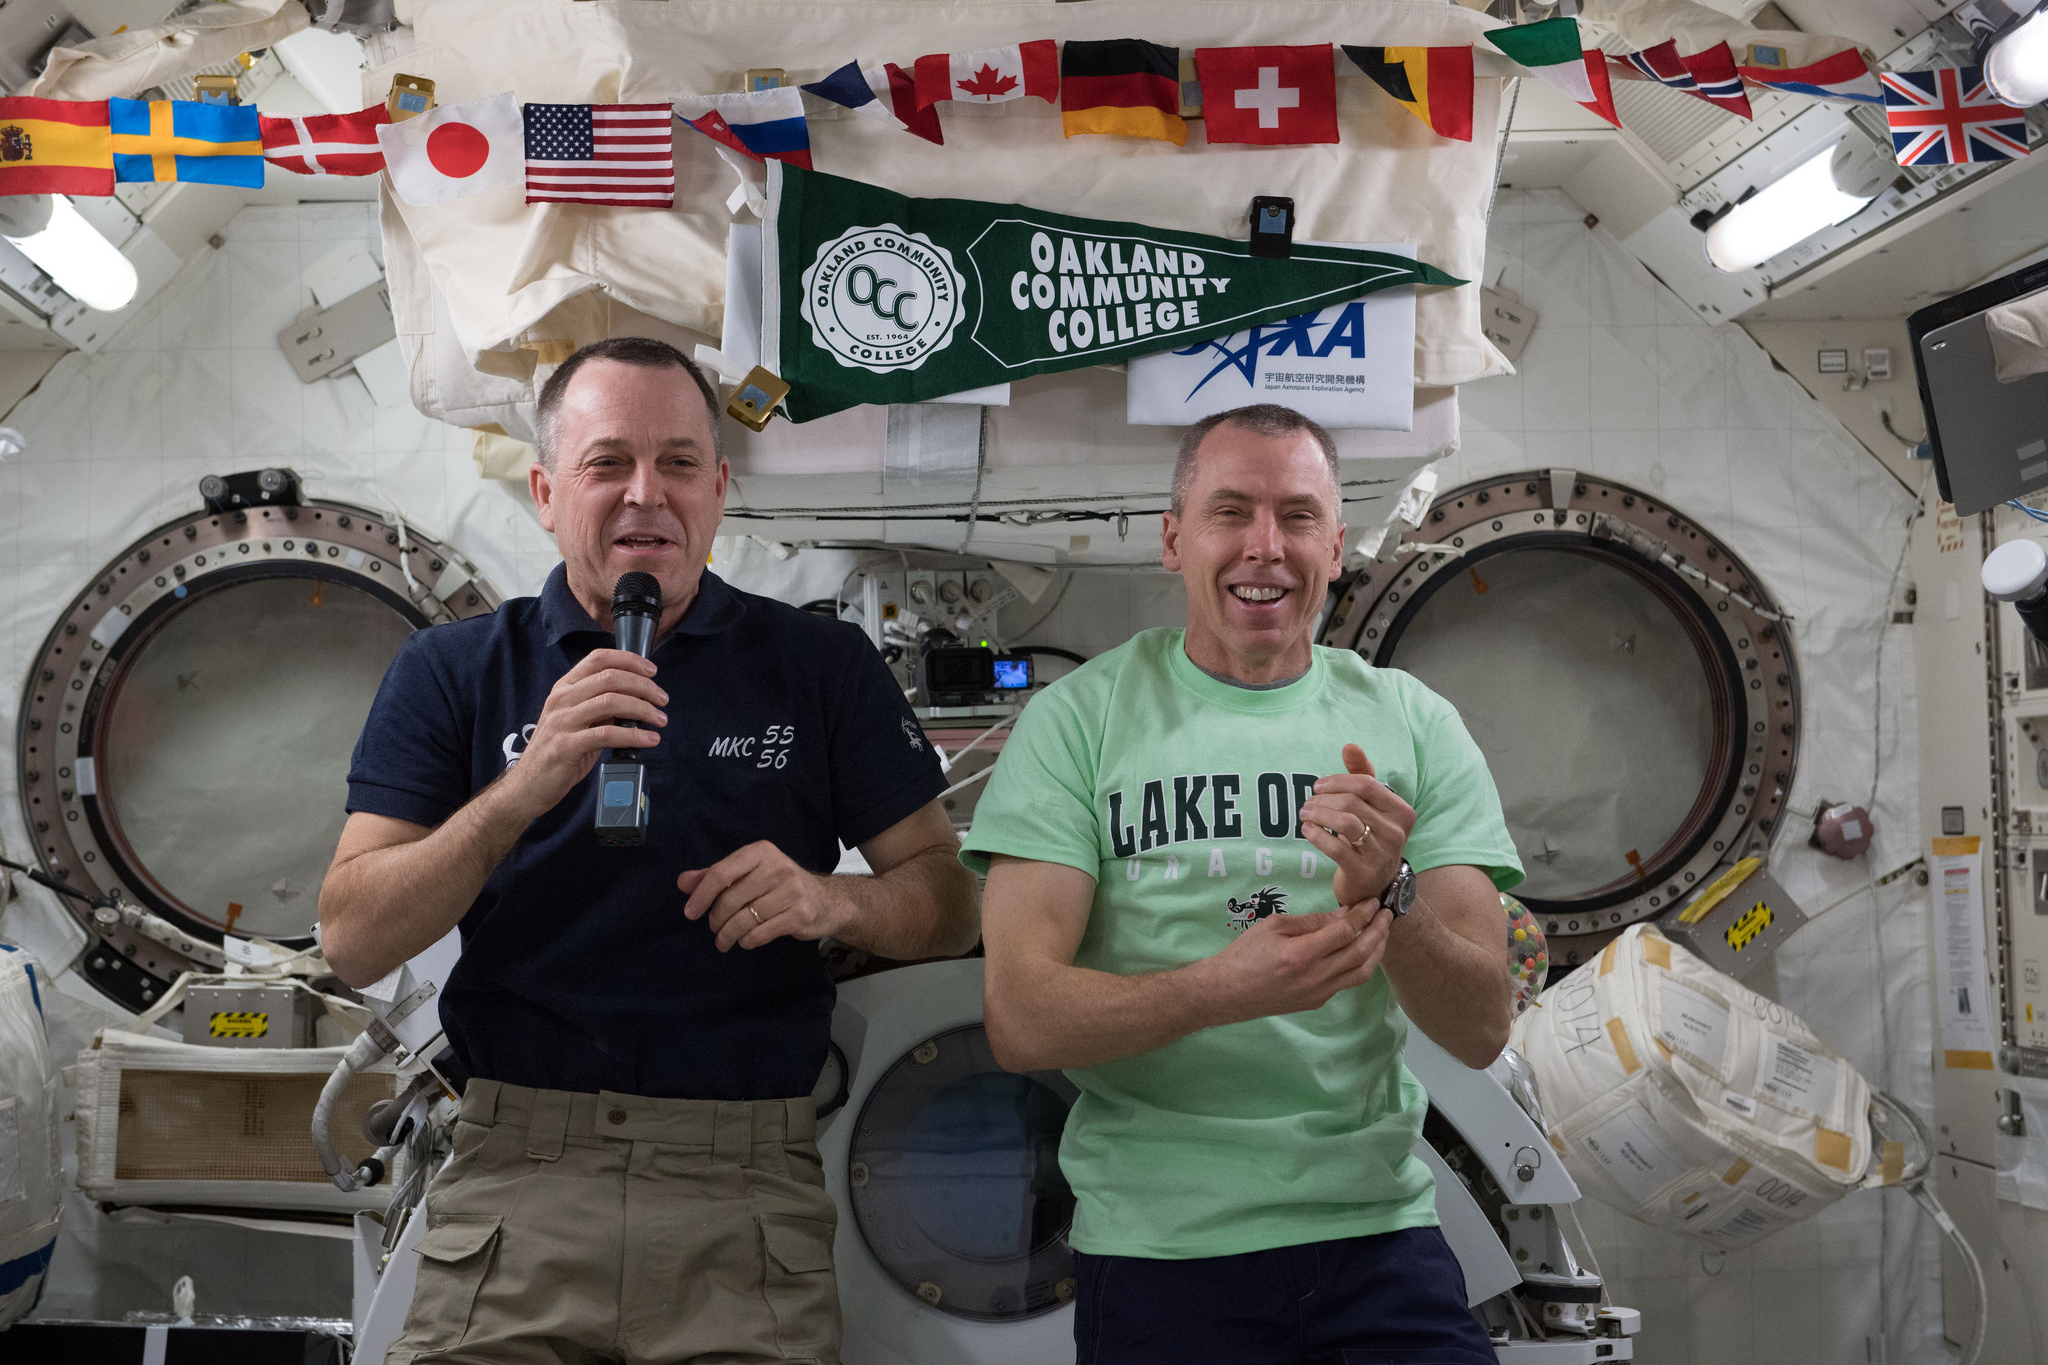 NASA Expedition 56 astronauts Drew Feustel (left) and Ricky Arnold (right) aboard the International Space Station